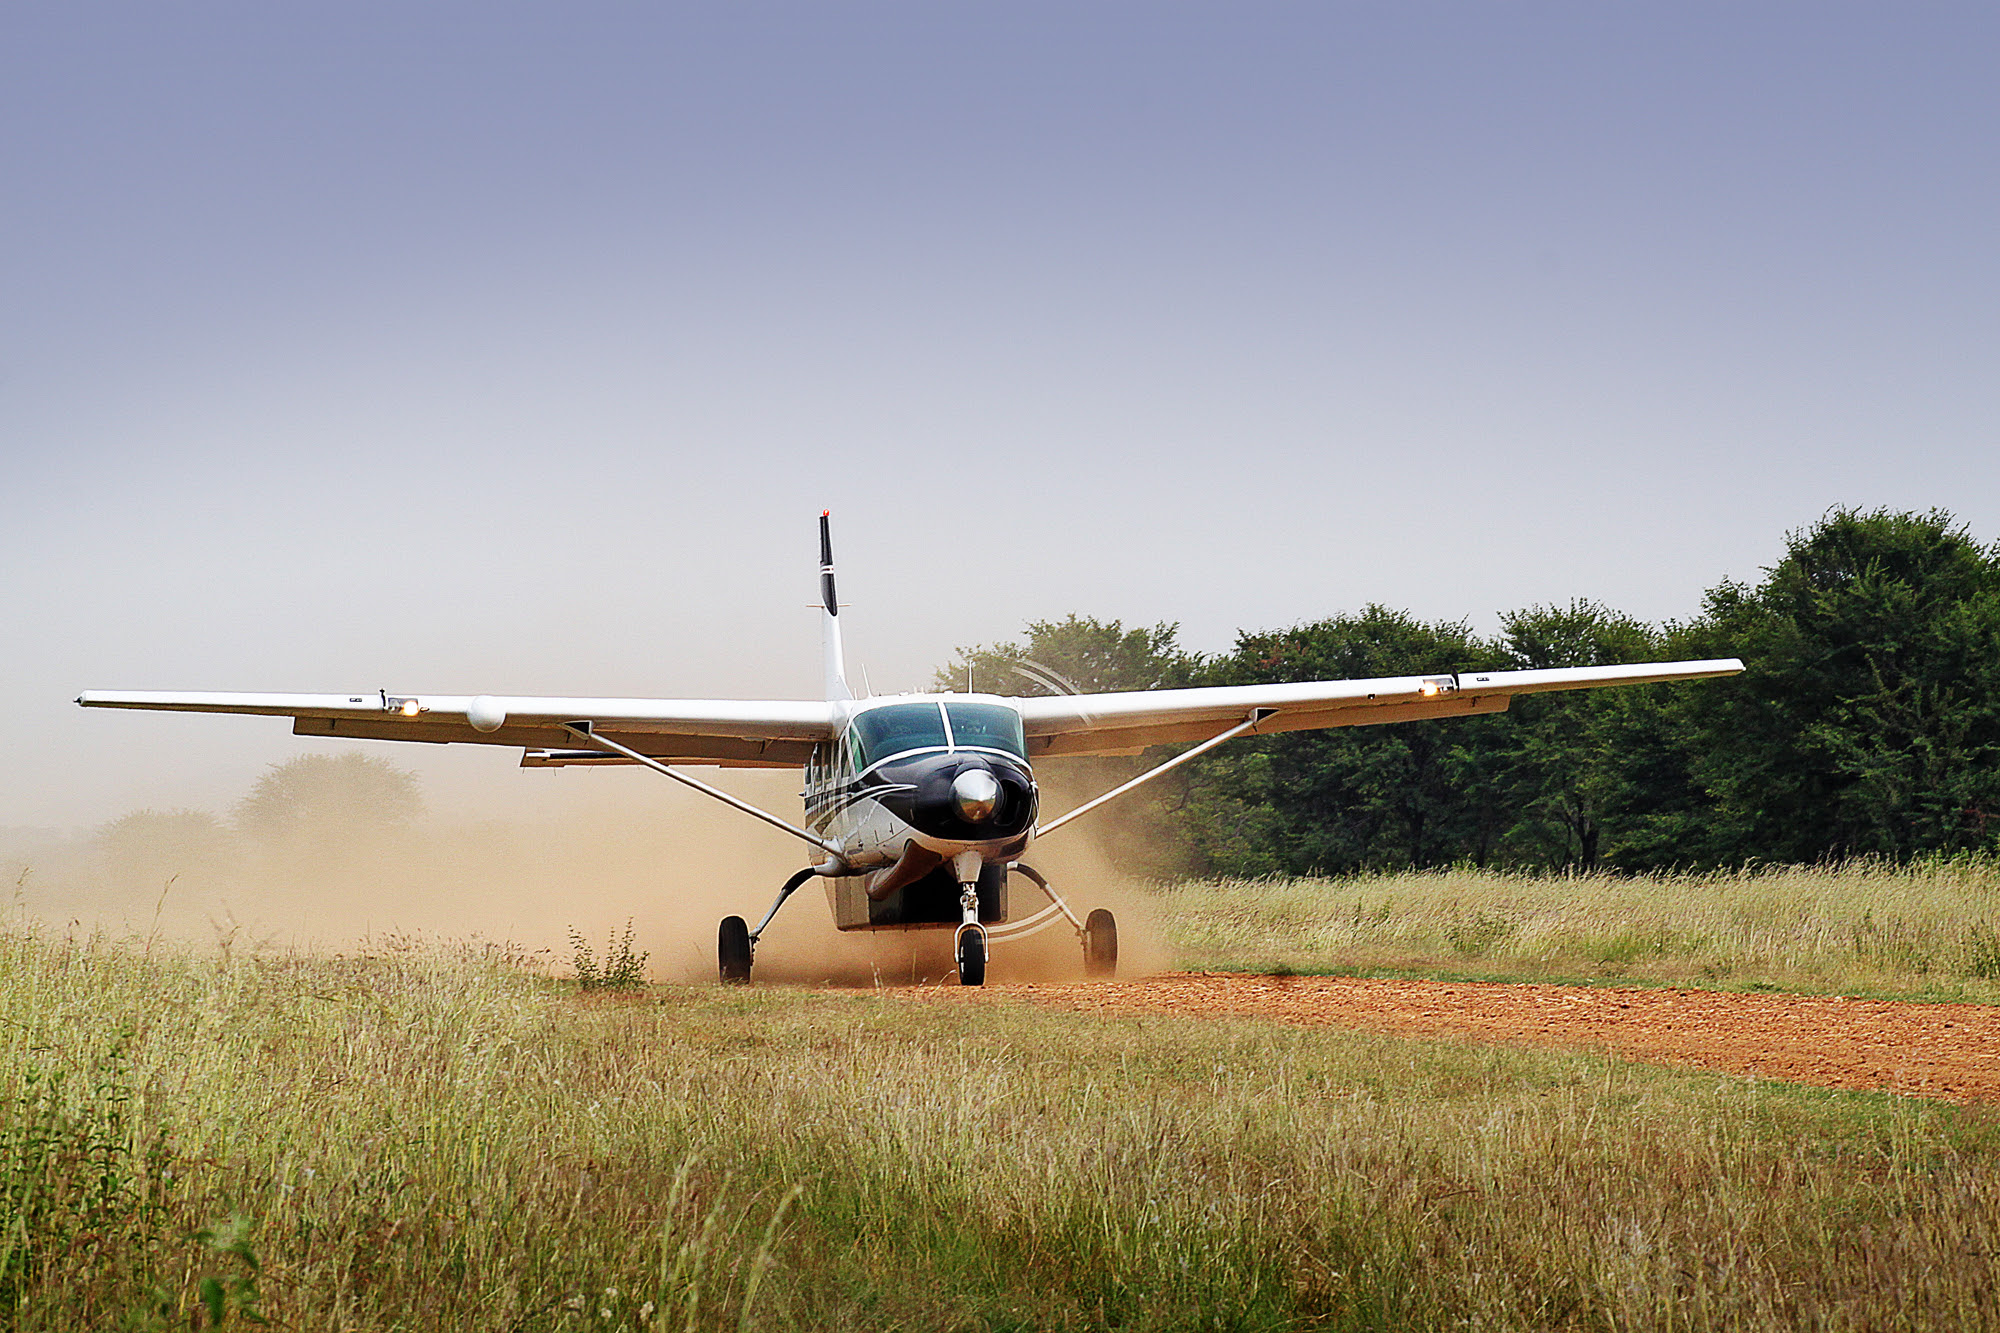 Having postponed operations in 2020, SkySafari relaunches in May 2021 with a brand-new itinerary that encompasses the highlights of East Africa and extended schedules for Kenya and Tanzania, all by private plane. 